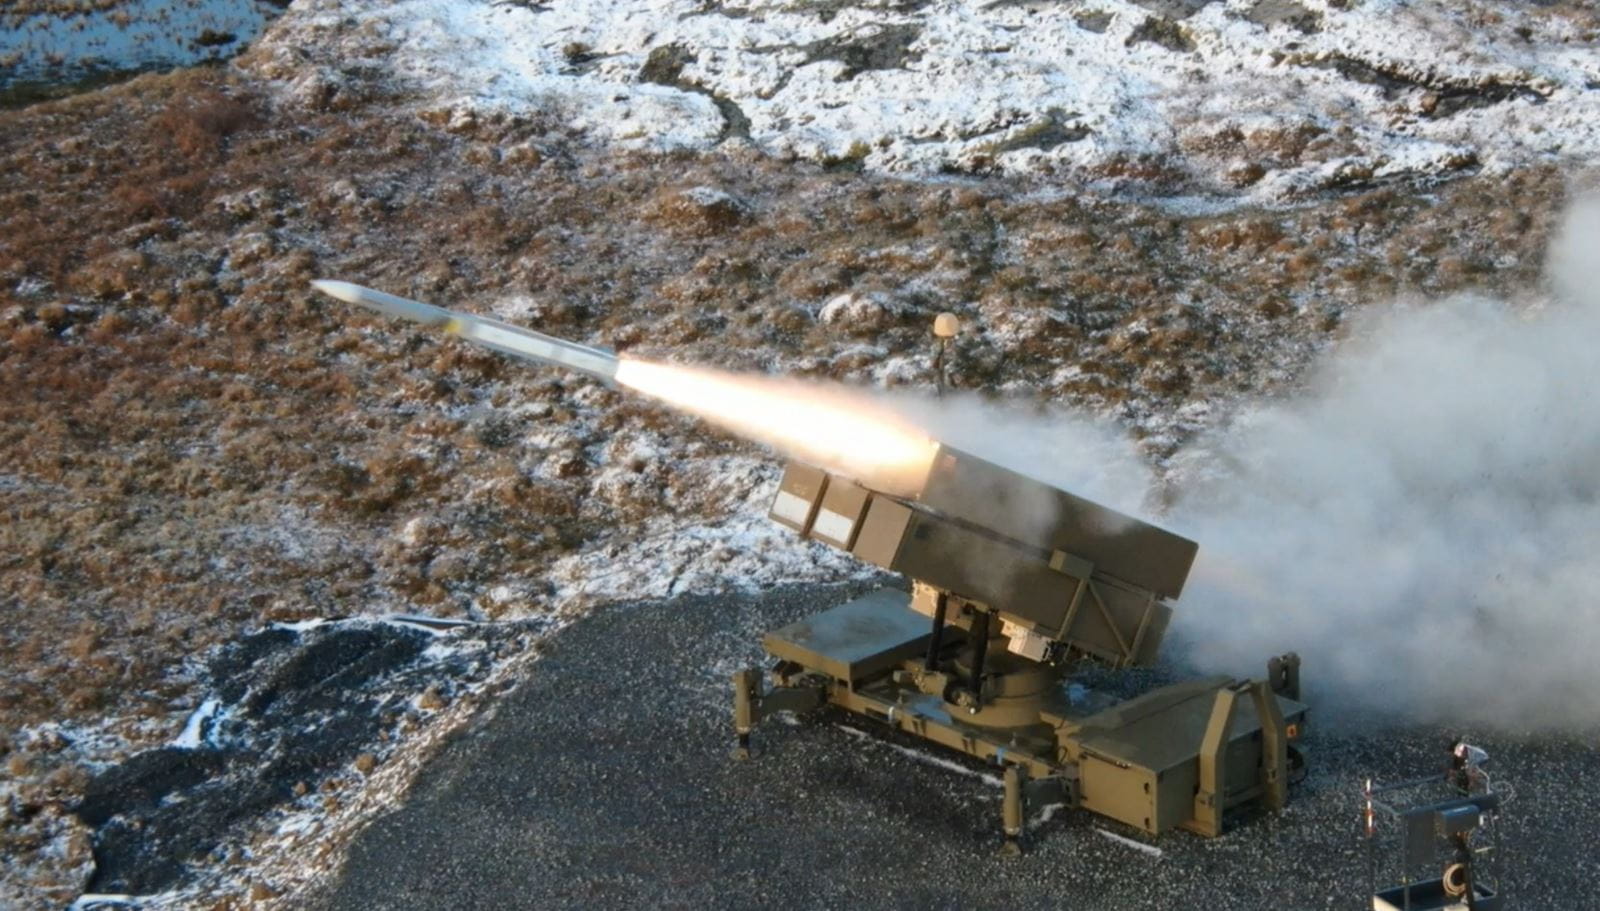 Canada has already purchased the NASAMS system for Ukraine